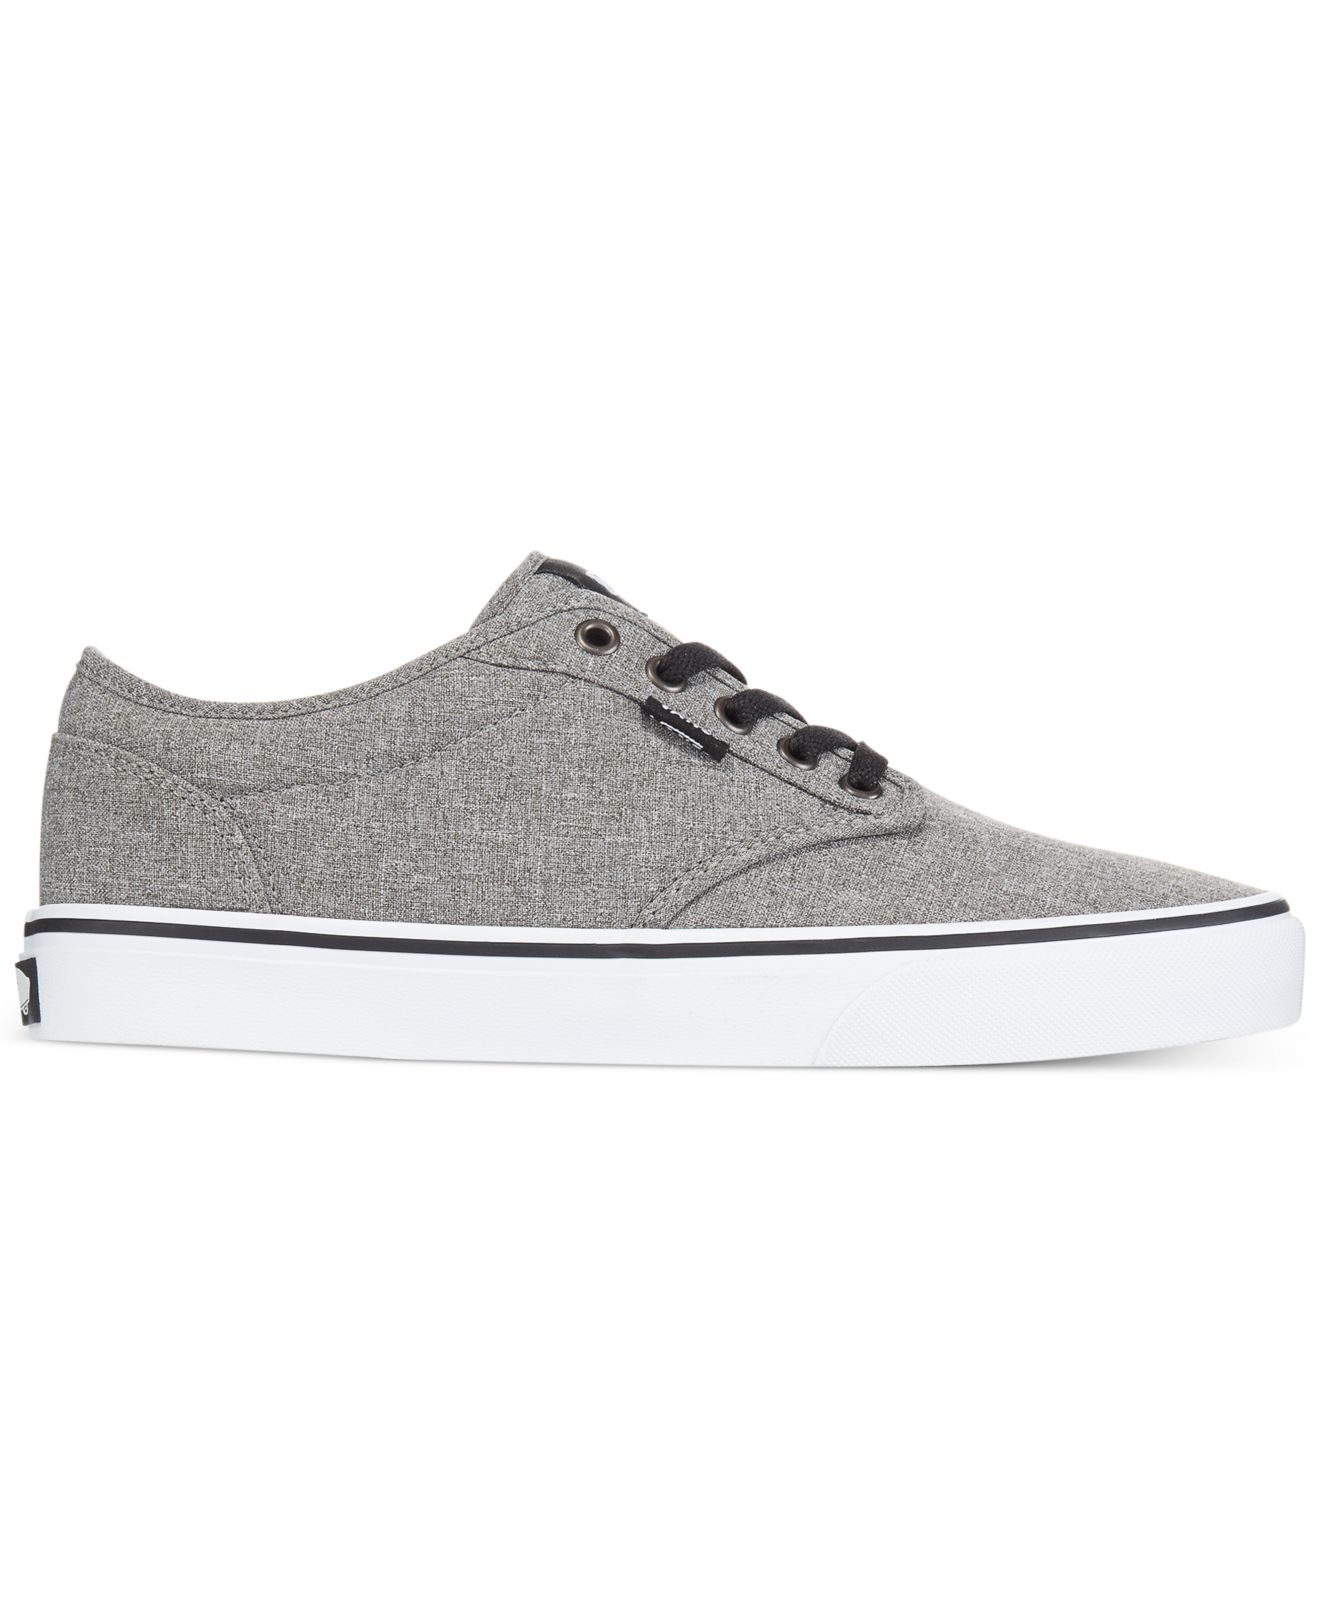 Vans Canvas Men's Atwood Heathered Sneakers in Gray for Men - Lyst